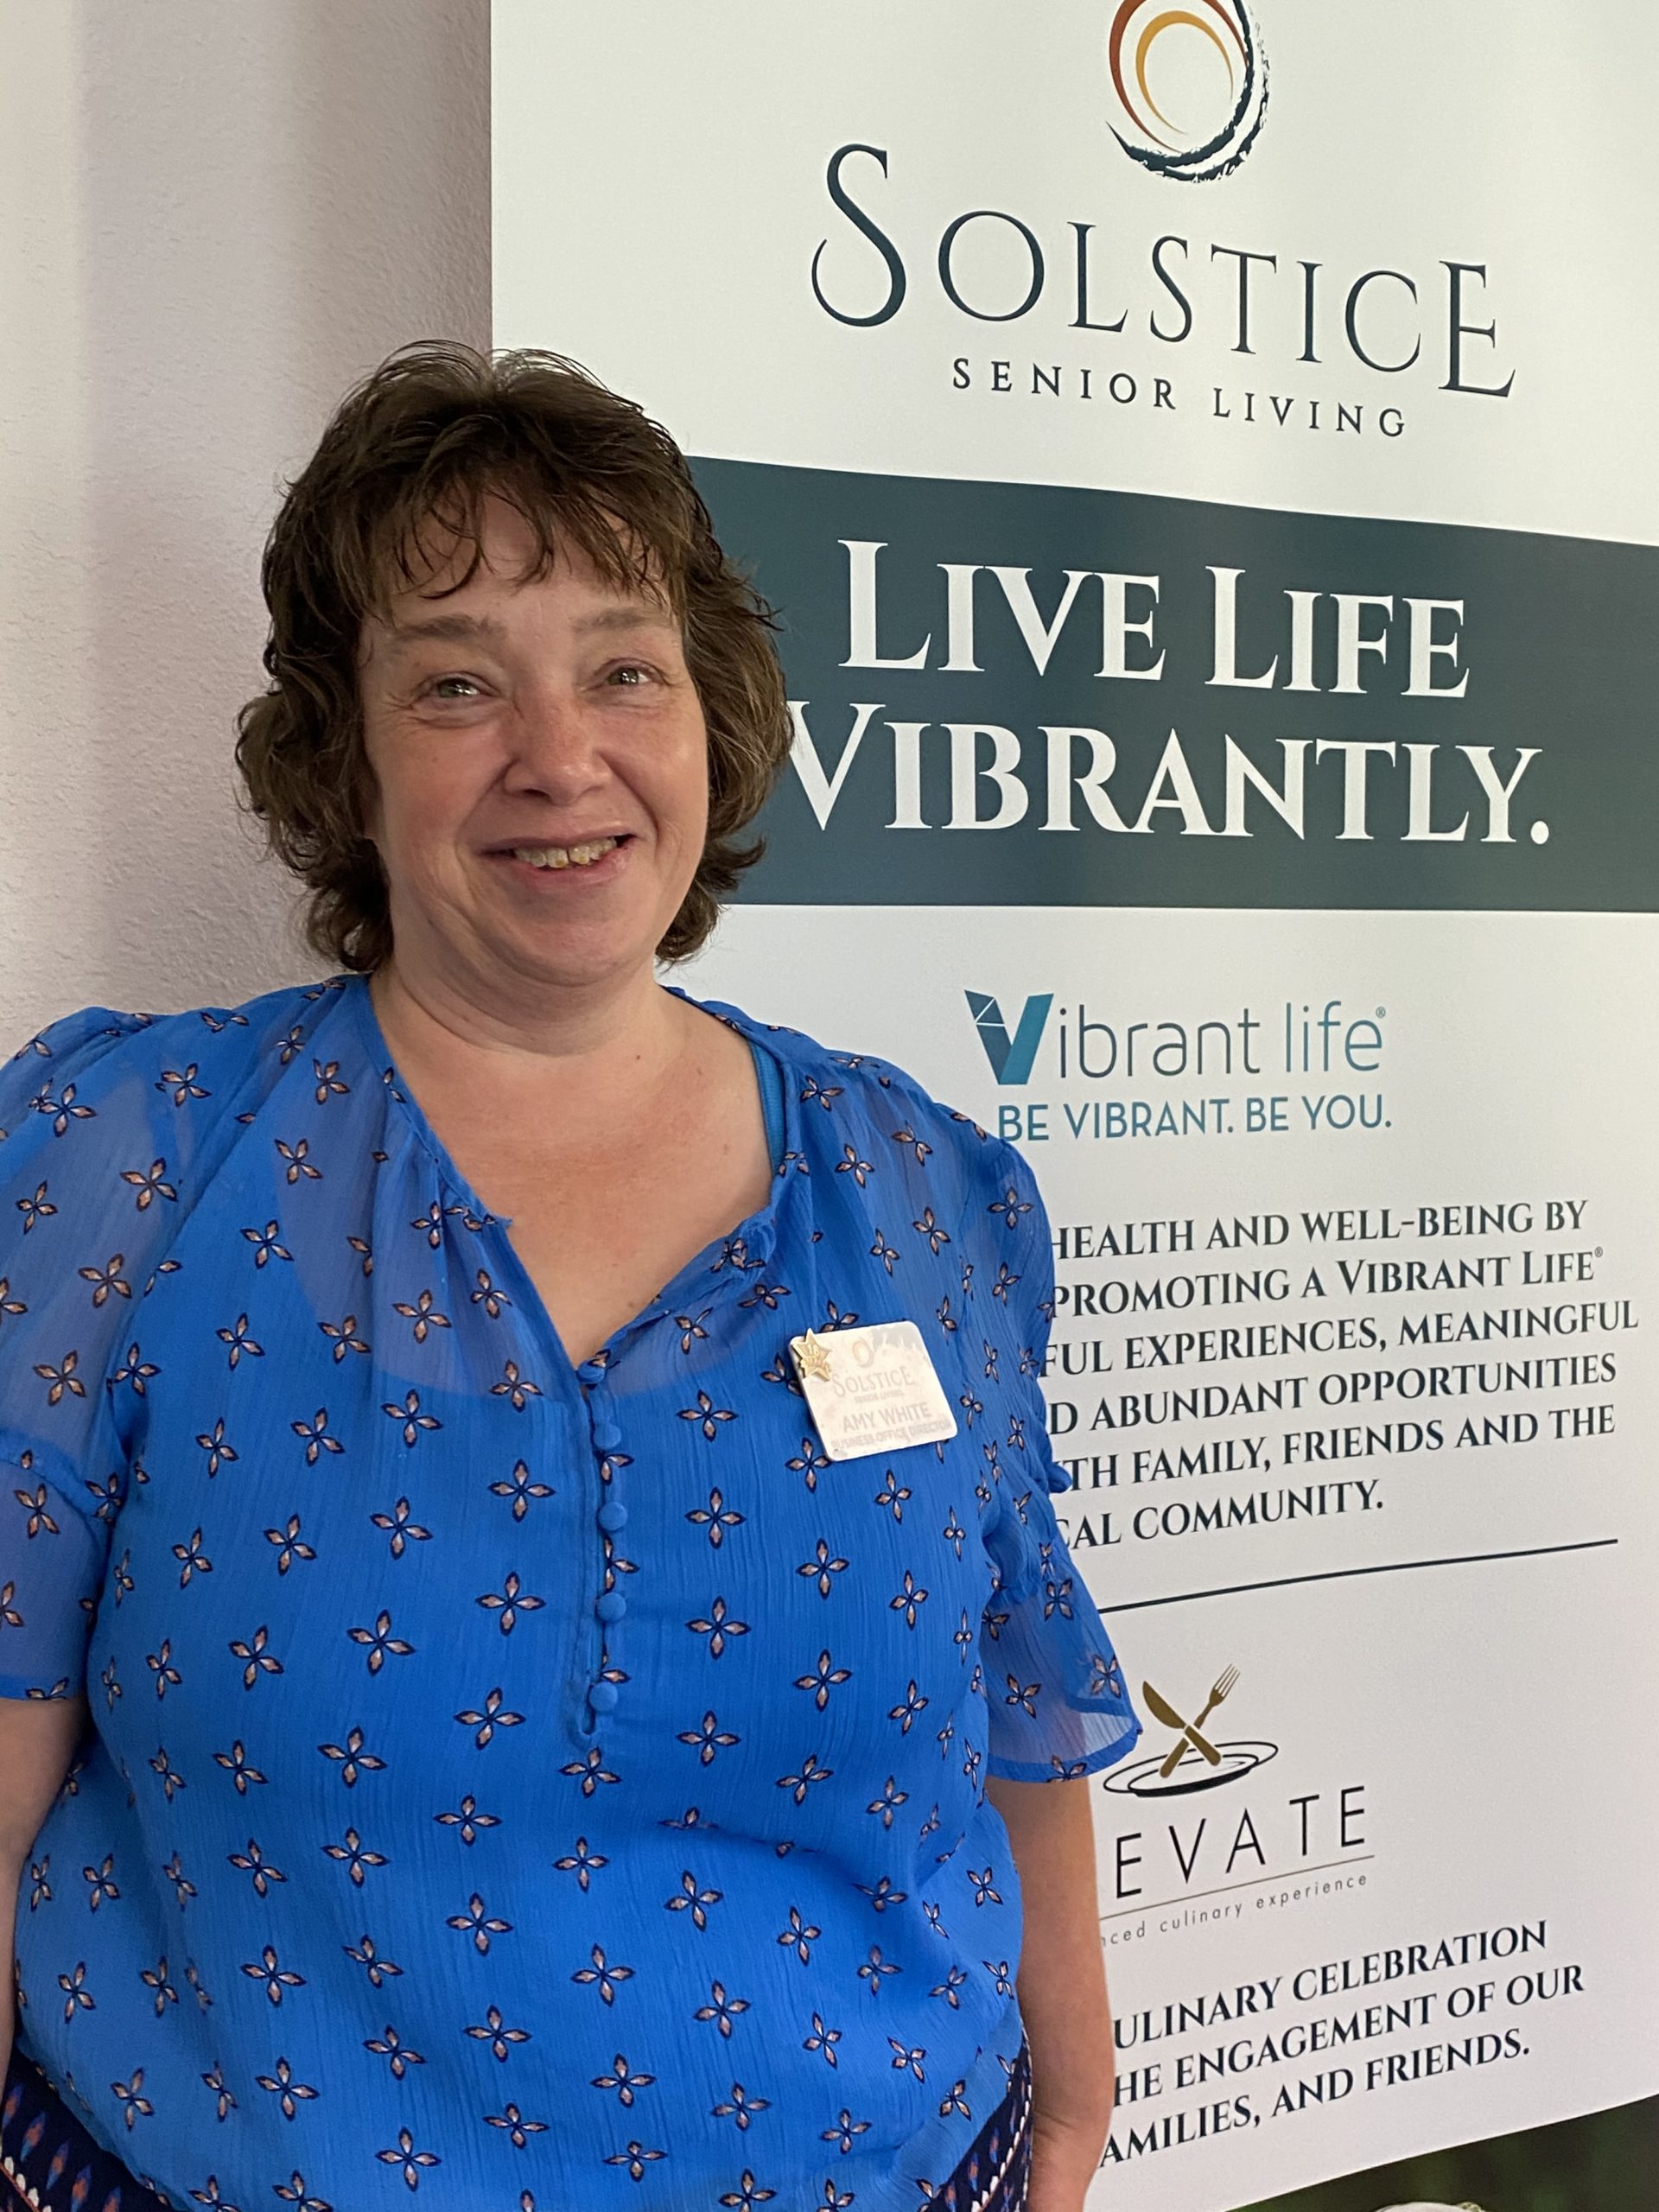 Amy White, Business Office Director, Solstice at Bangor